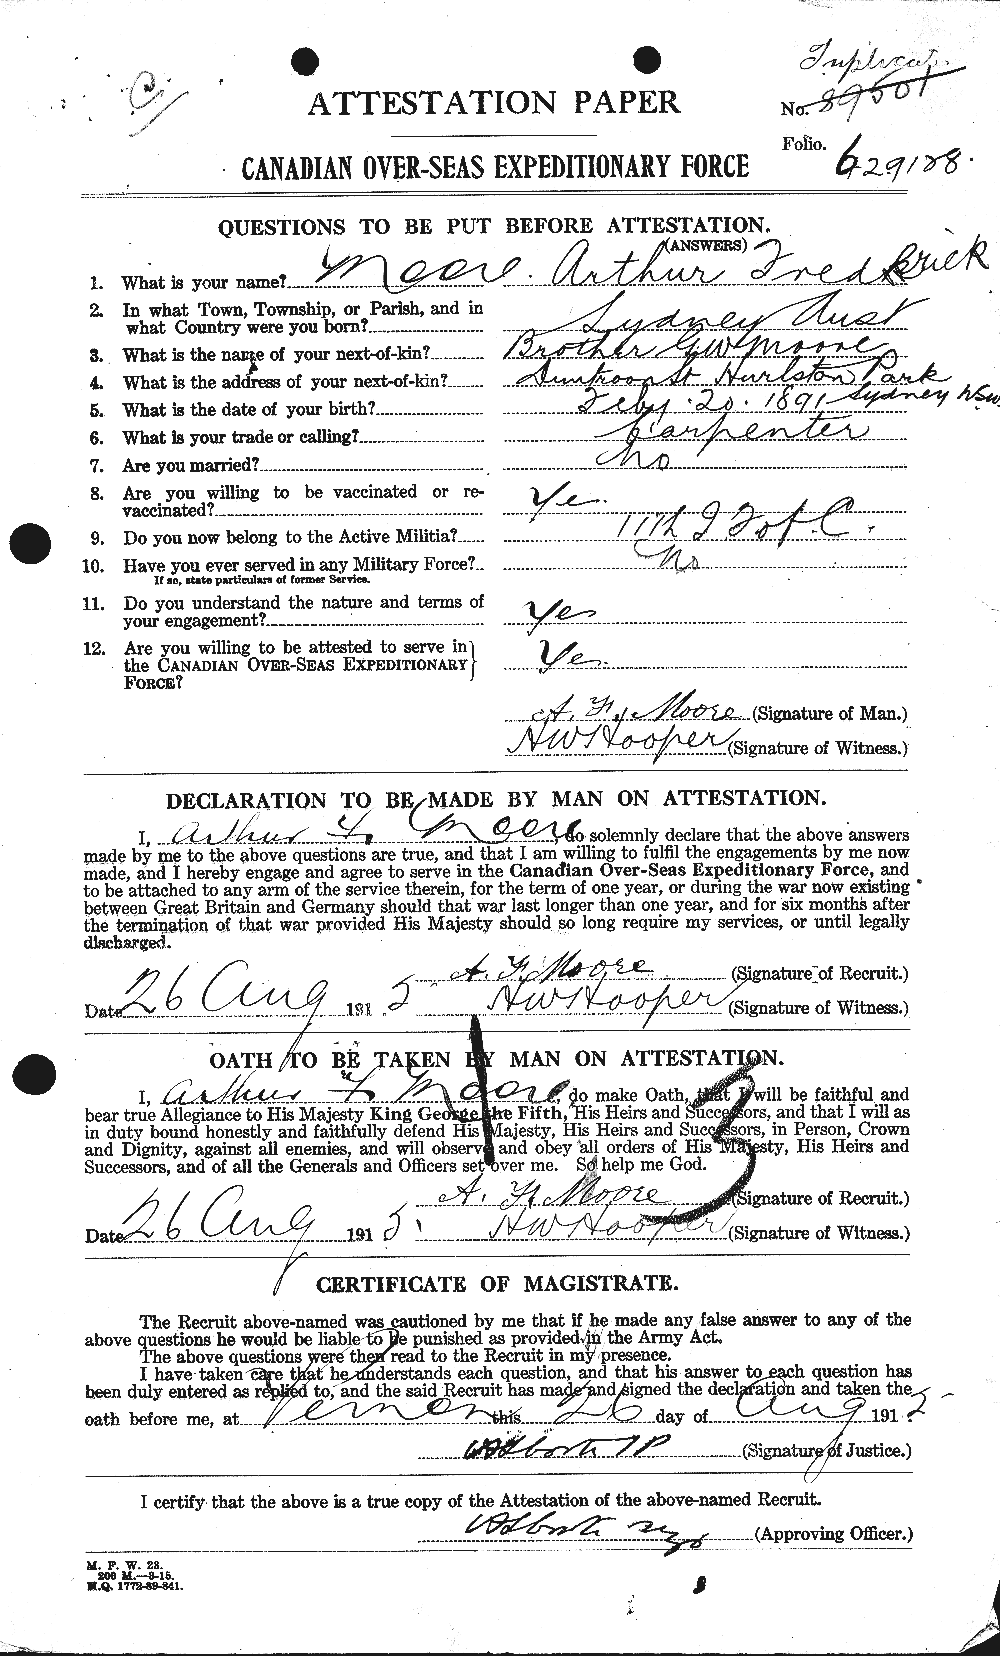 Personnel Records of the First World War - CEF 506445a